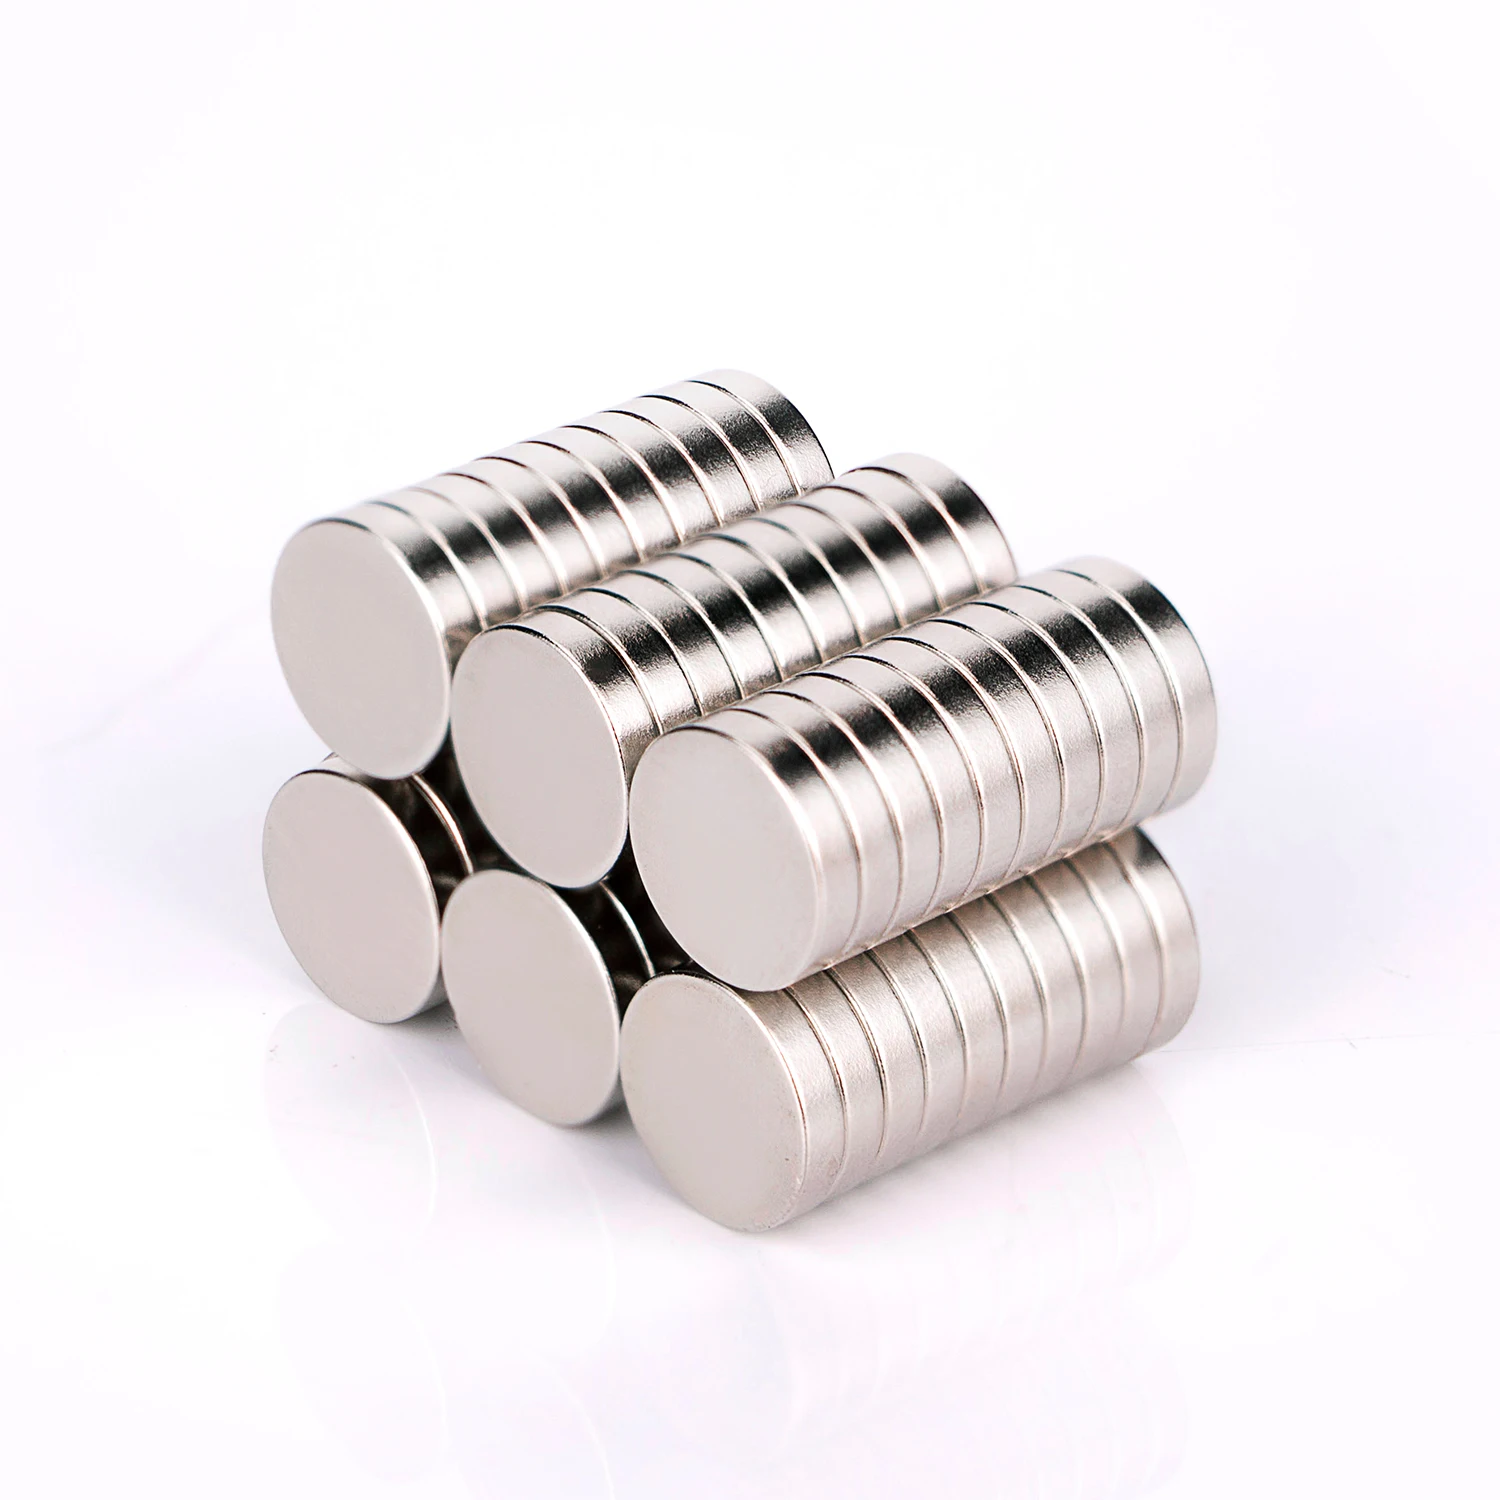 8x2 10x1 10x1.5 10x2 12x2mm Magnet Hot Round Magnet Strong magnets Rare Earth Neodymium Magnet 15x2 18x2